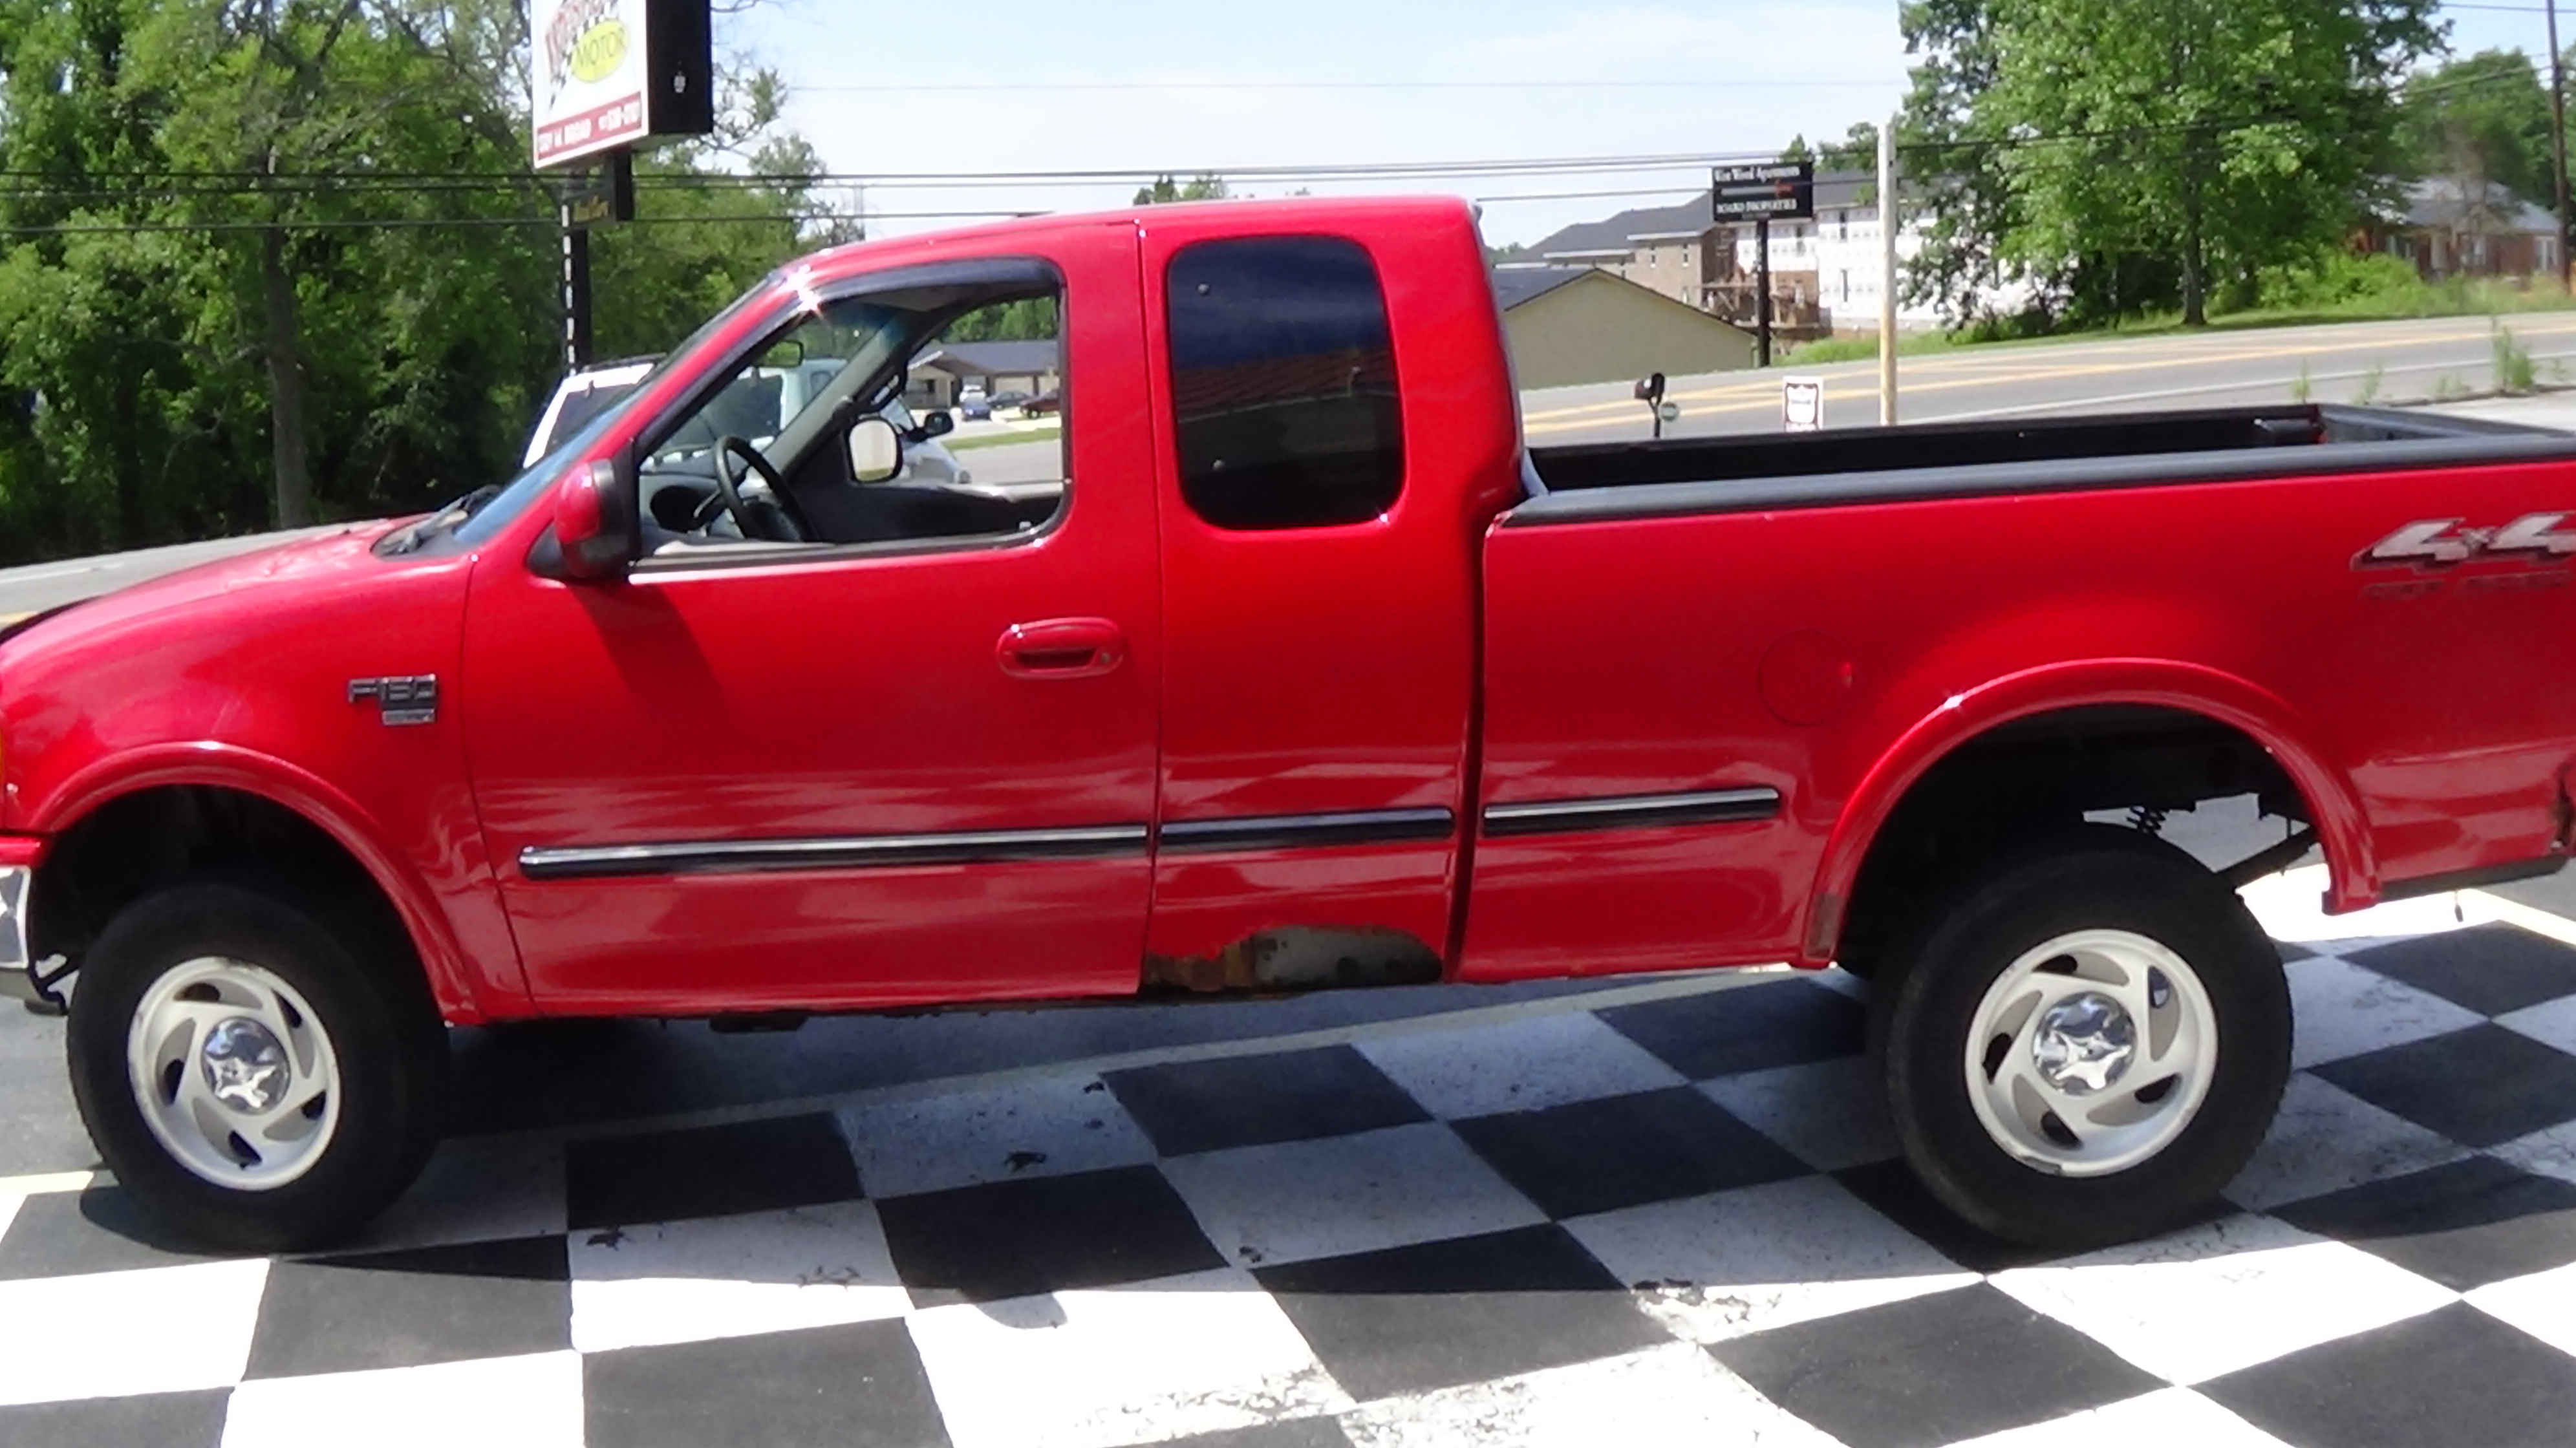 1998 FORD F150 4X4 | BuffysCars.com 1998 Ford F150 5.4 4x4 Towing Capacity